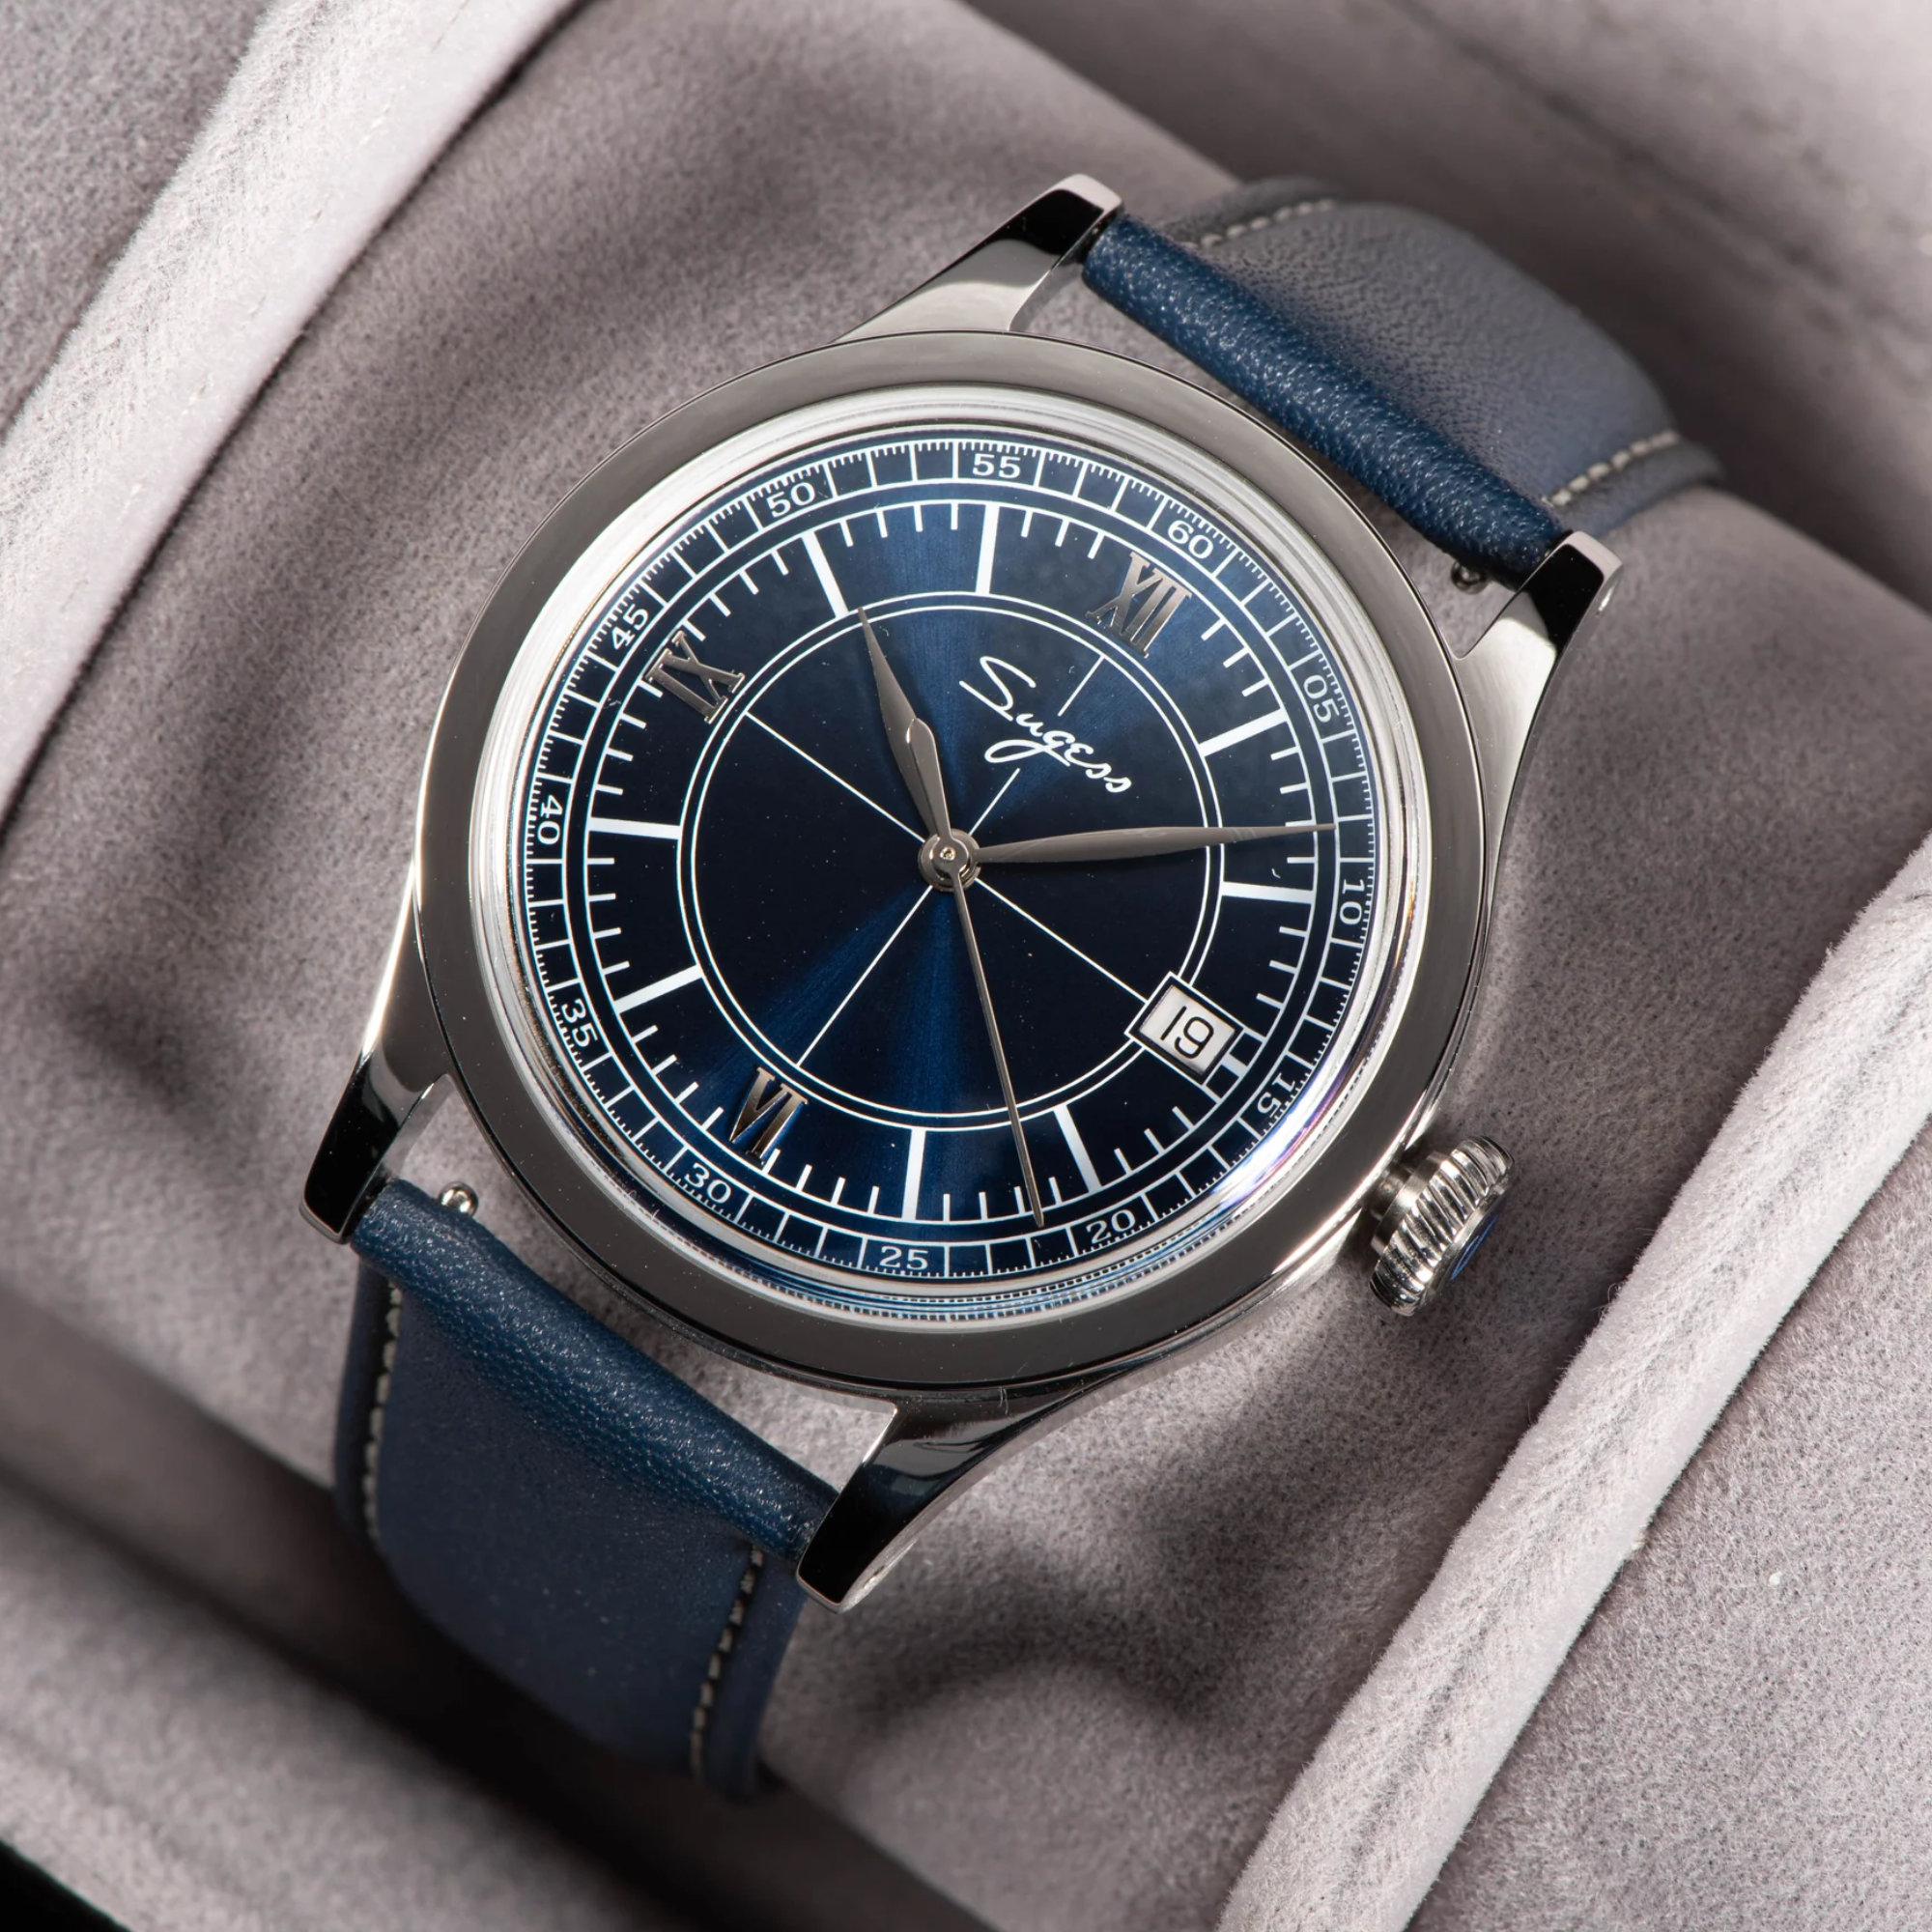 Sugess Heritage S411-3B Seagull 2130 Movement Stainless Steel Case Deep Blue Dial SU4113BDB watch dream-watches.com india